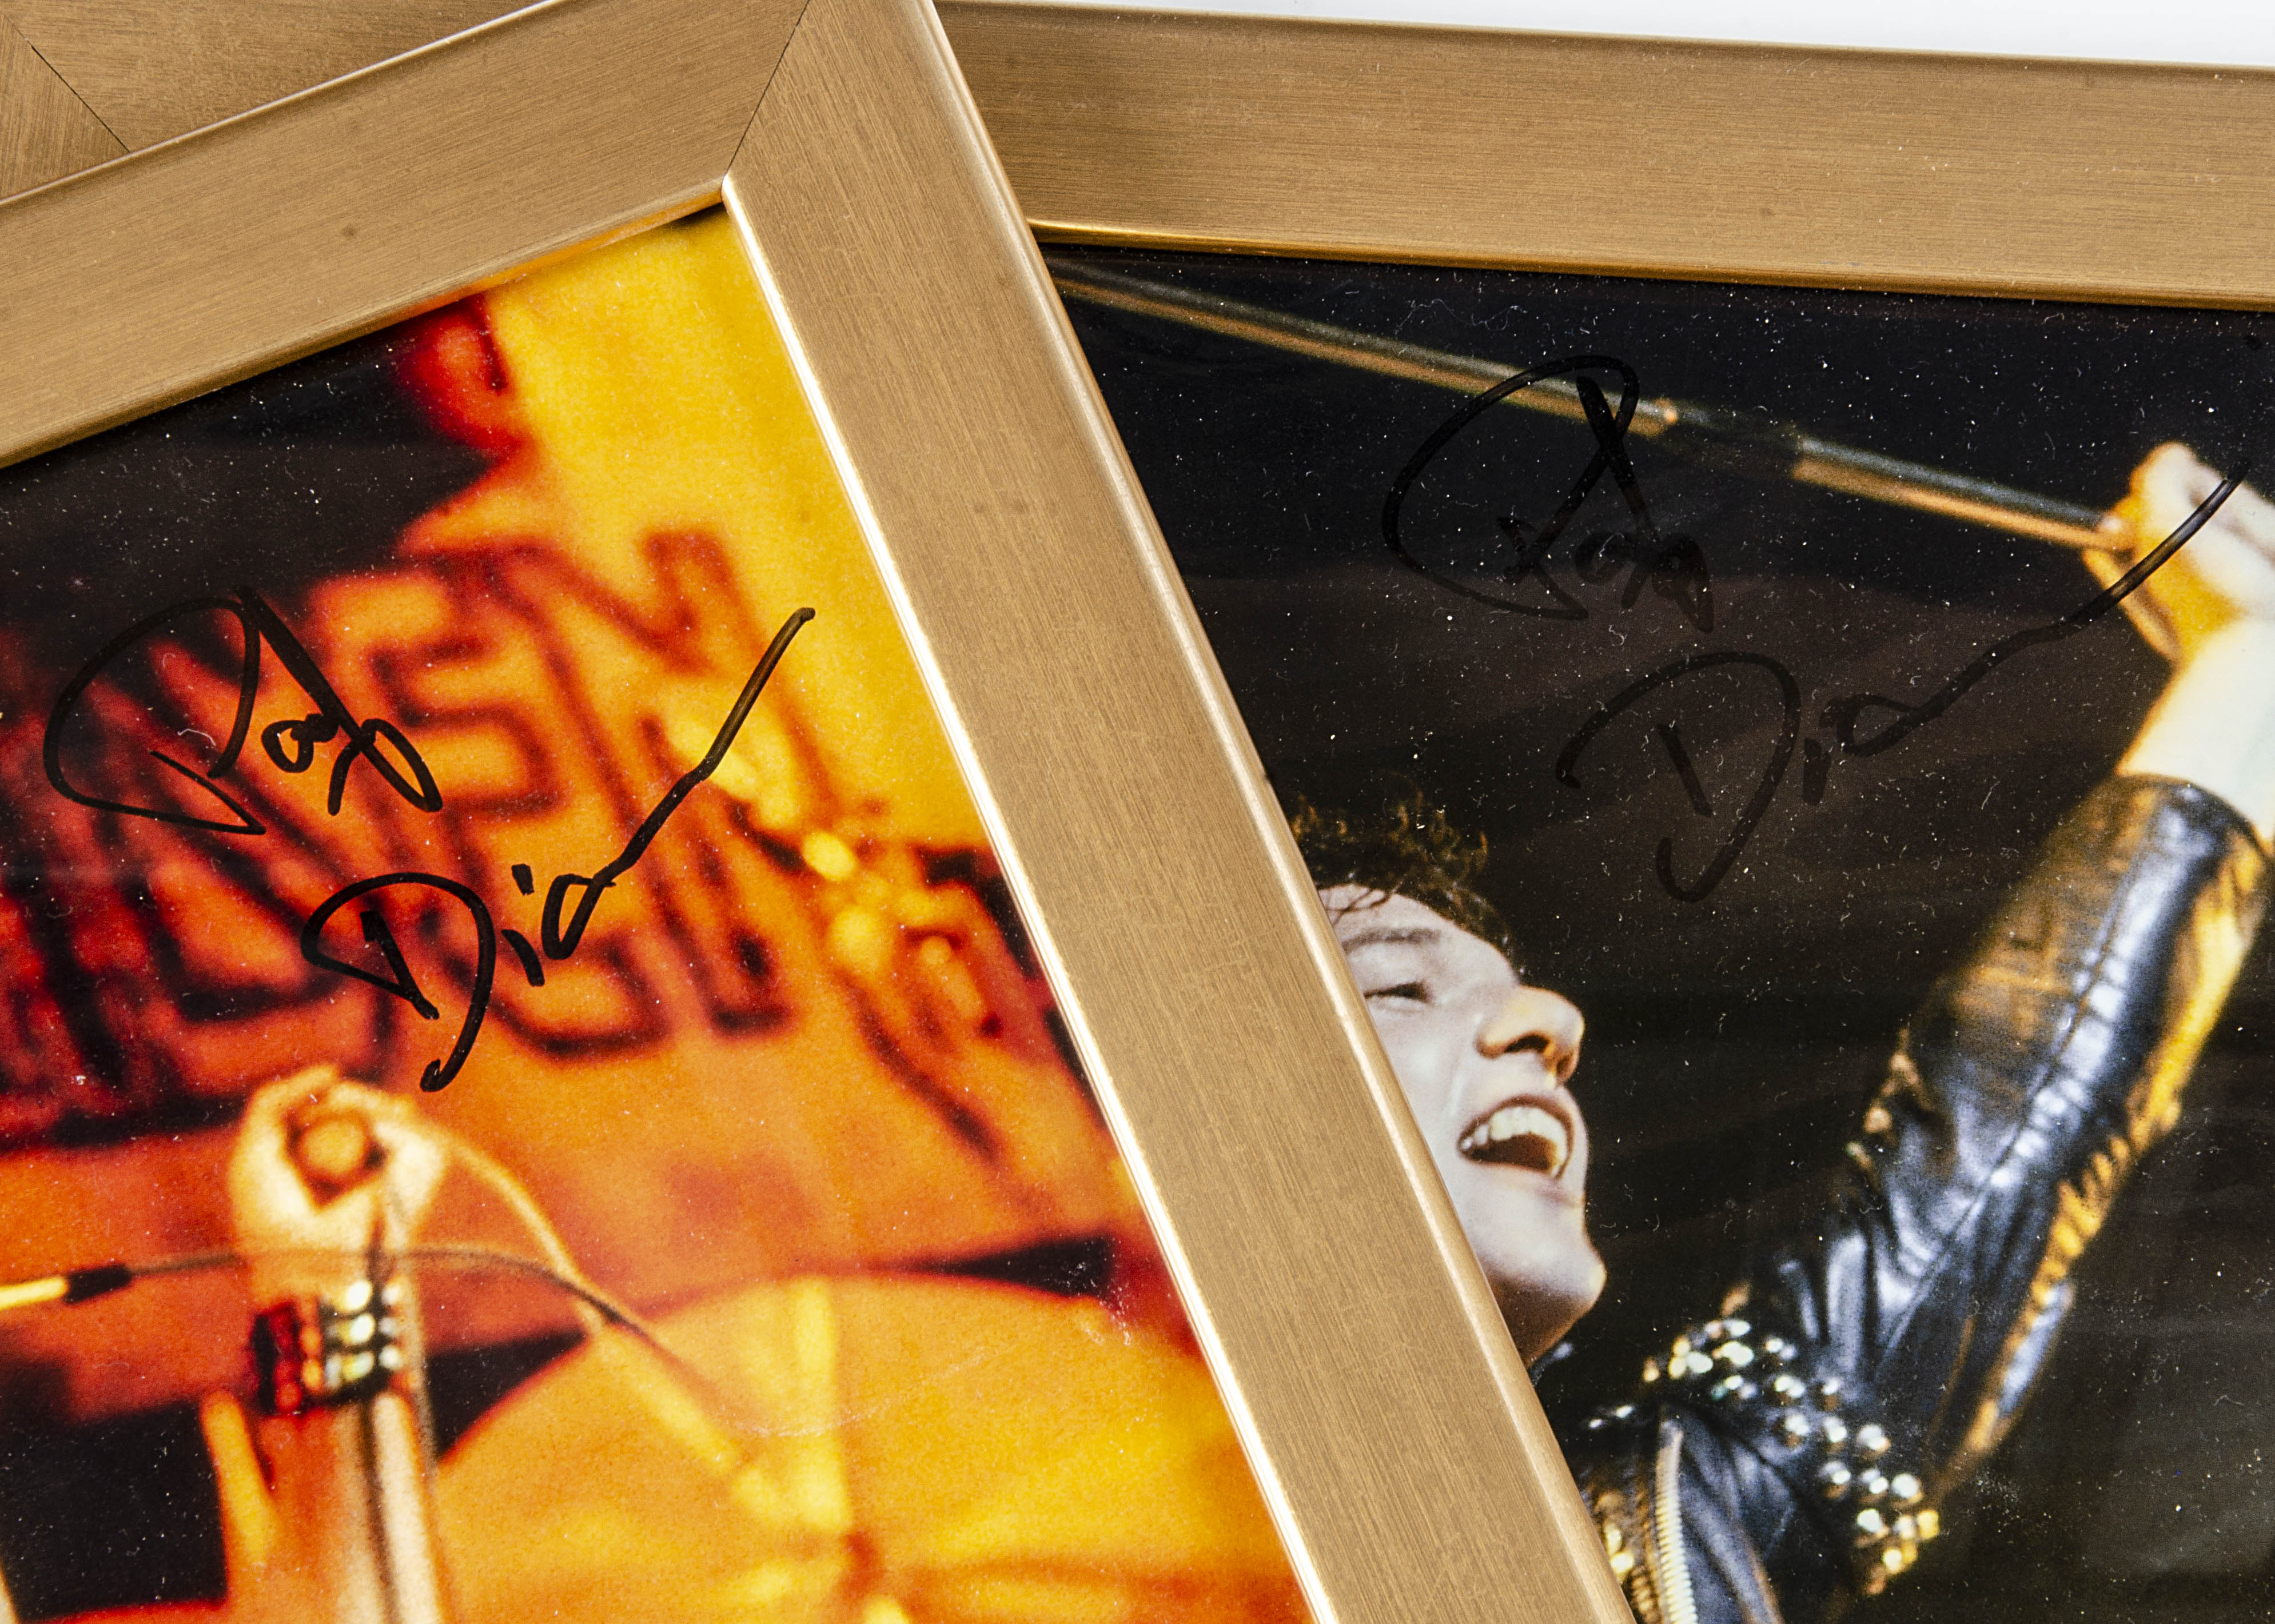 Paul Di'Anno Signed Photos, two framed and glazed live shots both signed by Paul - Excellent - Image 2 of 2